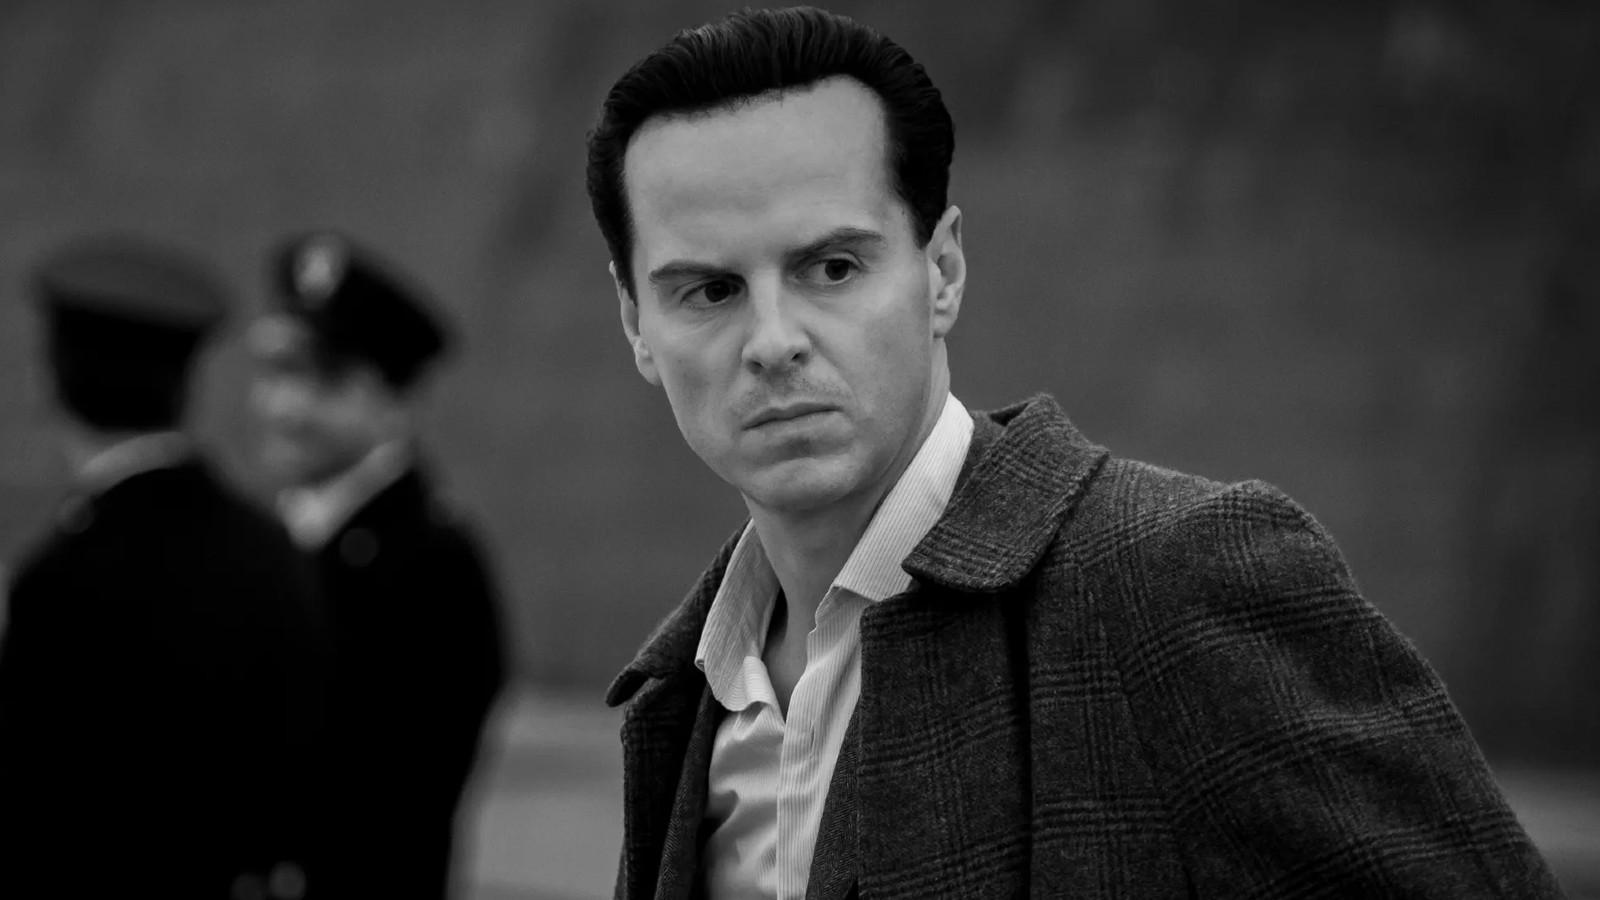 Andrew Scott looking deeply concerned as Ripley.